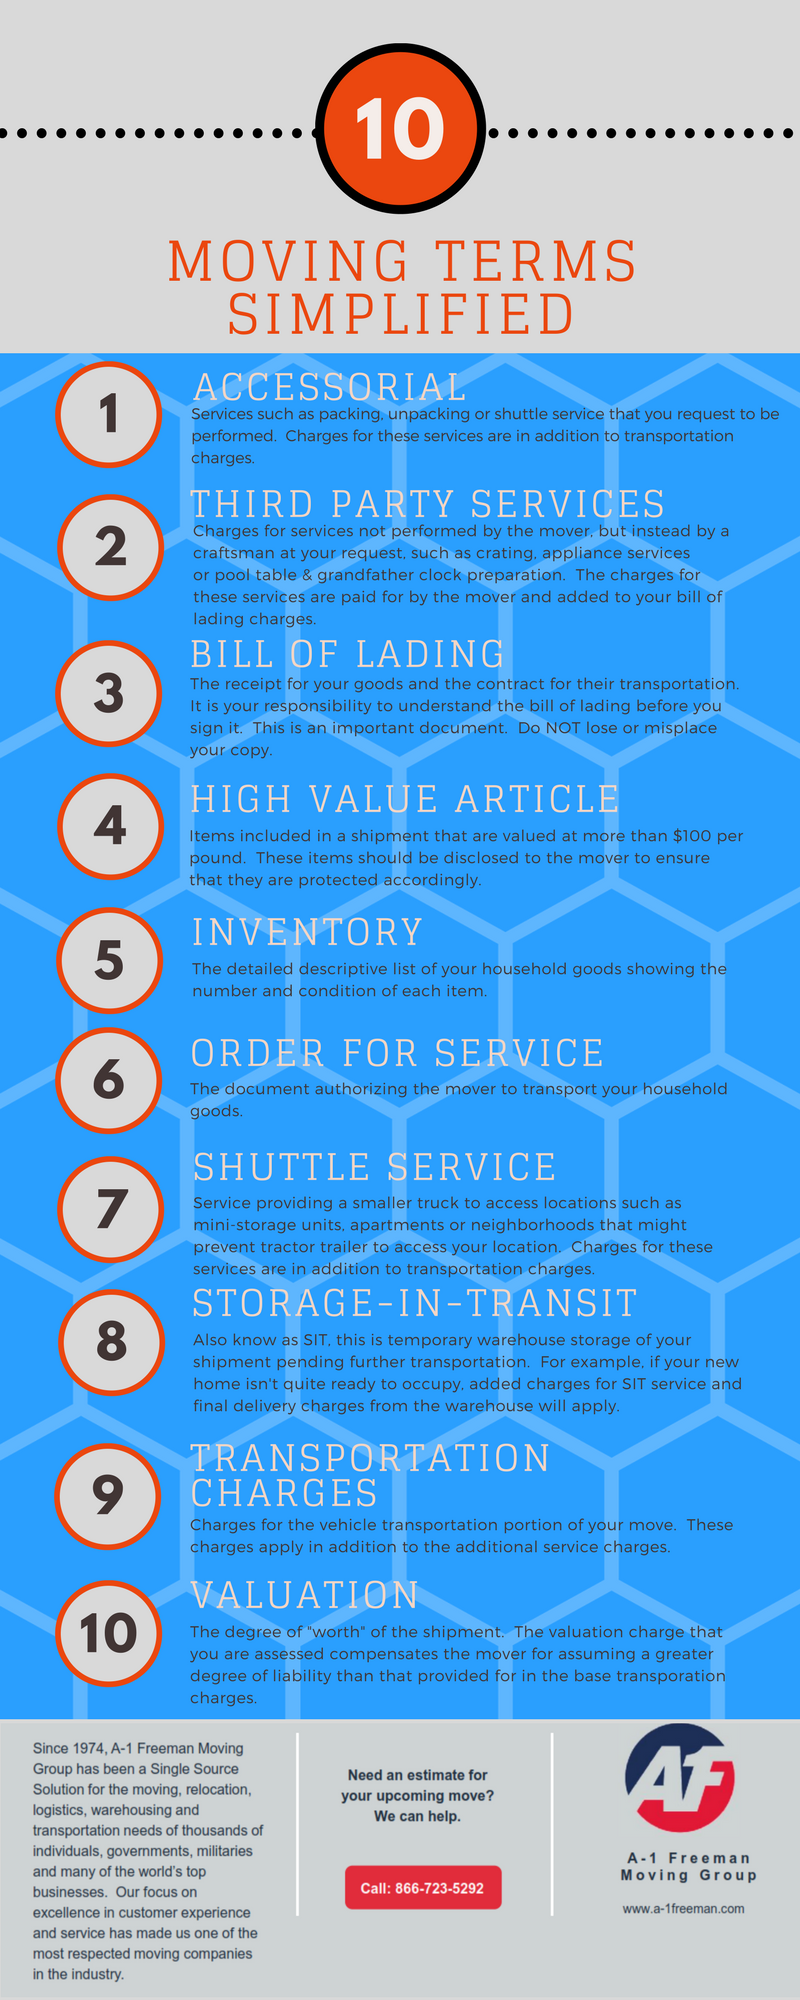 A-1 Freeman Moving Group Killeen Moving Terms Infographic